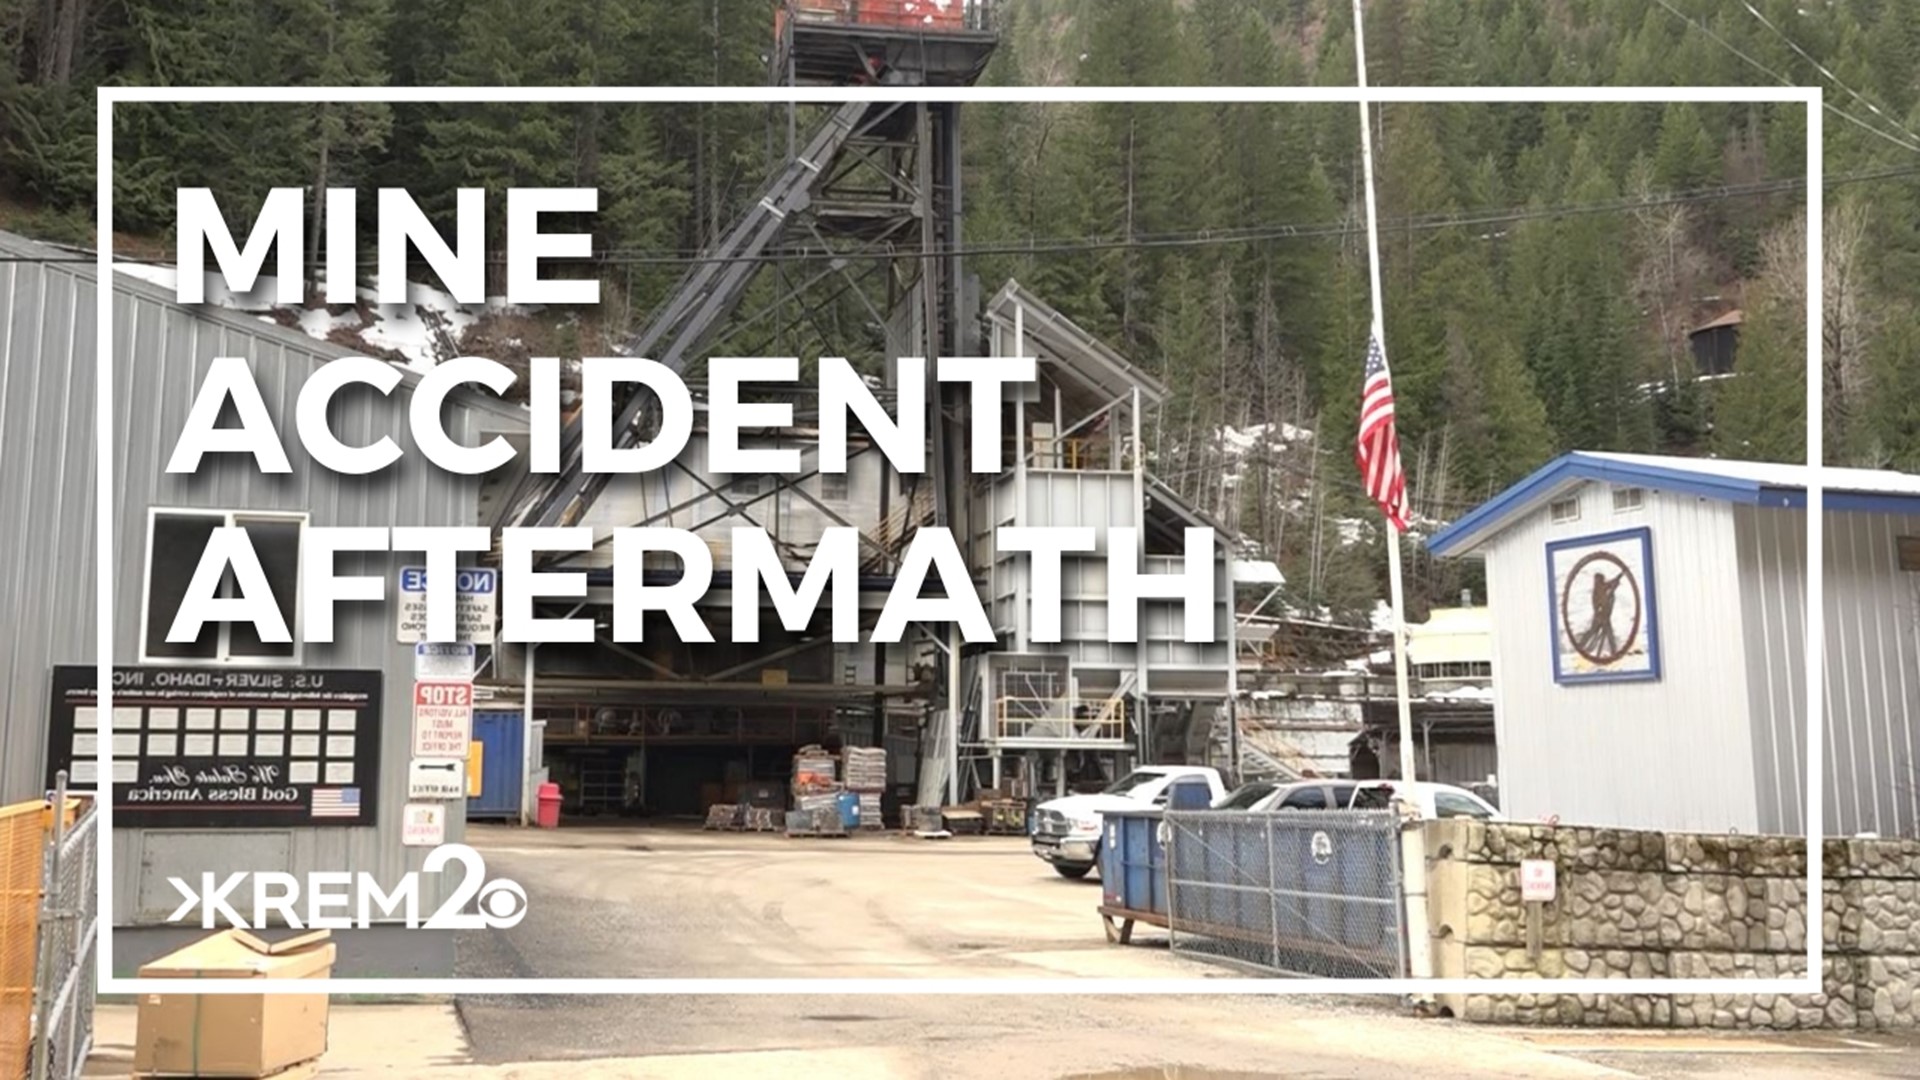 Officials with the Galena Mine confirmed one of its underground miners died Tuesday night when falling ground struck them. Now, the community is reacting.